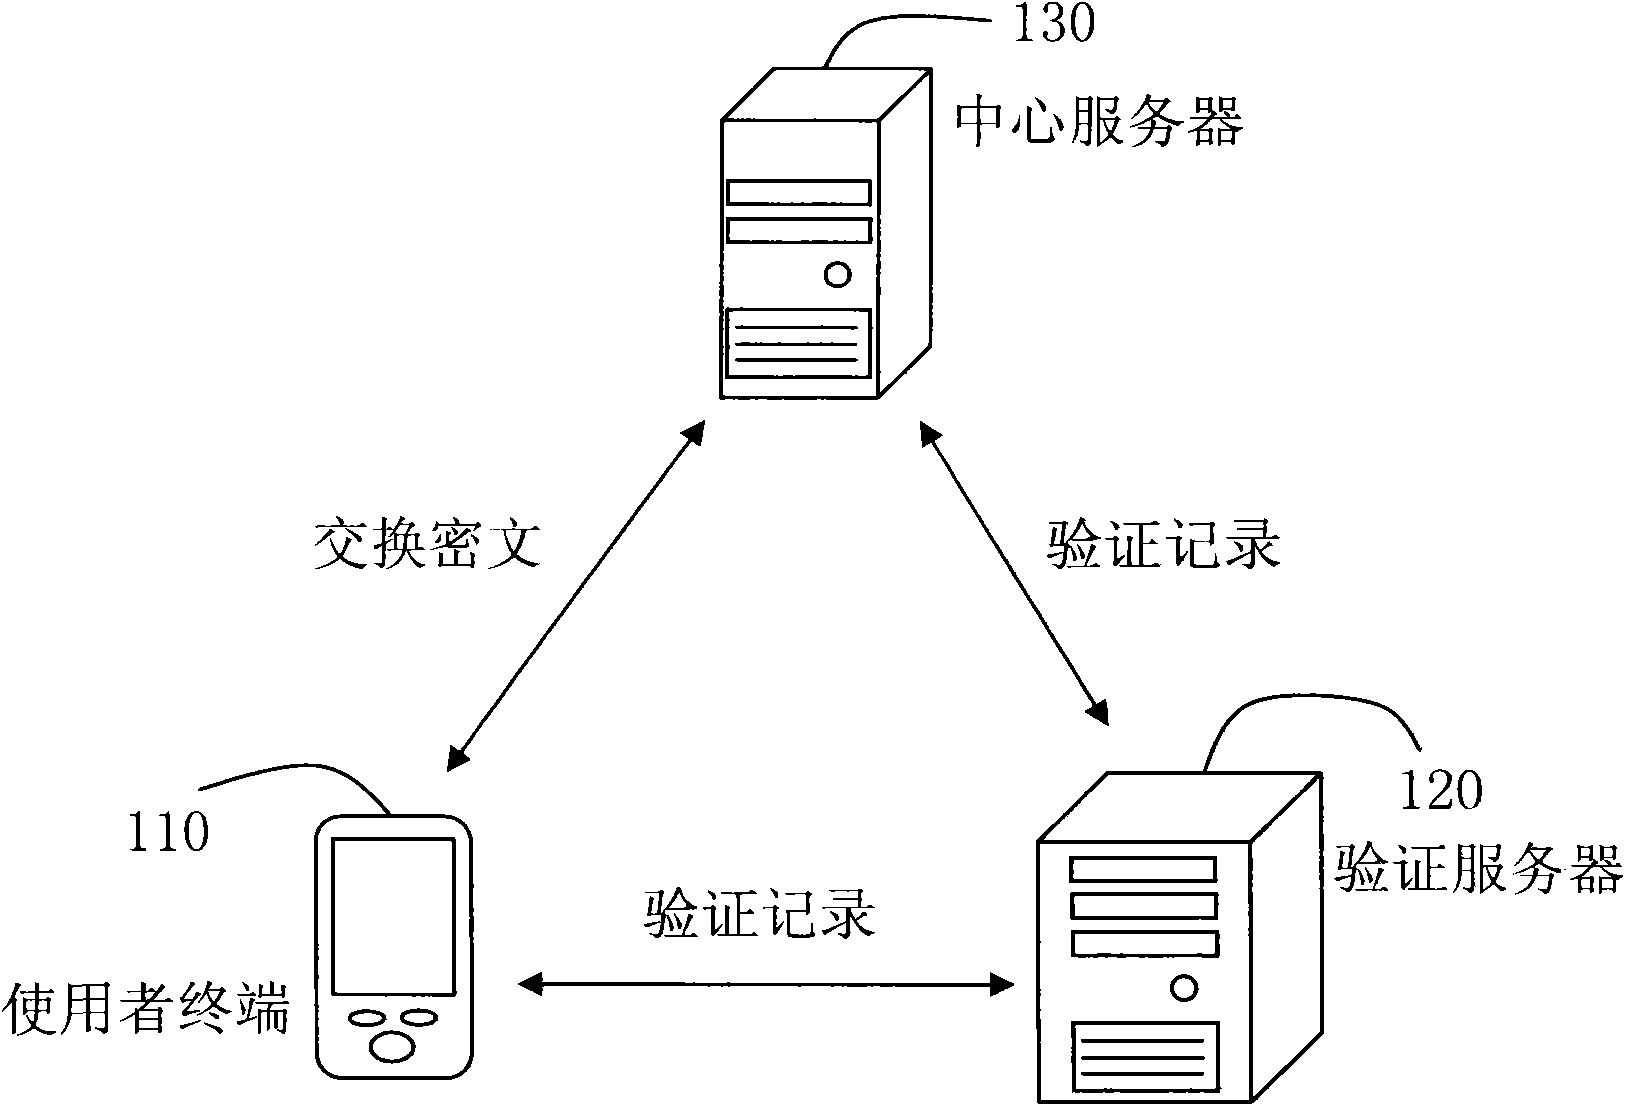 Recording system and method based on one-way hash function